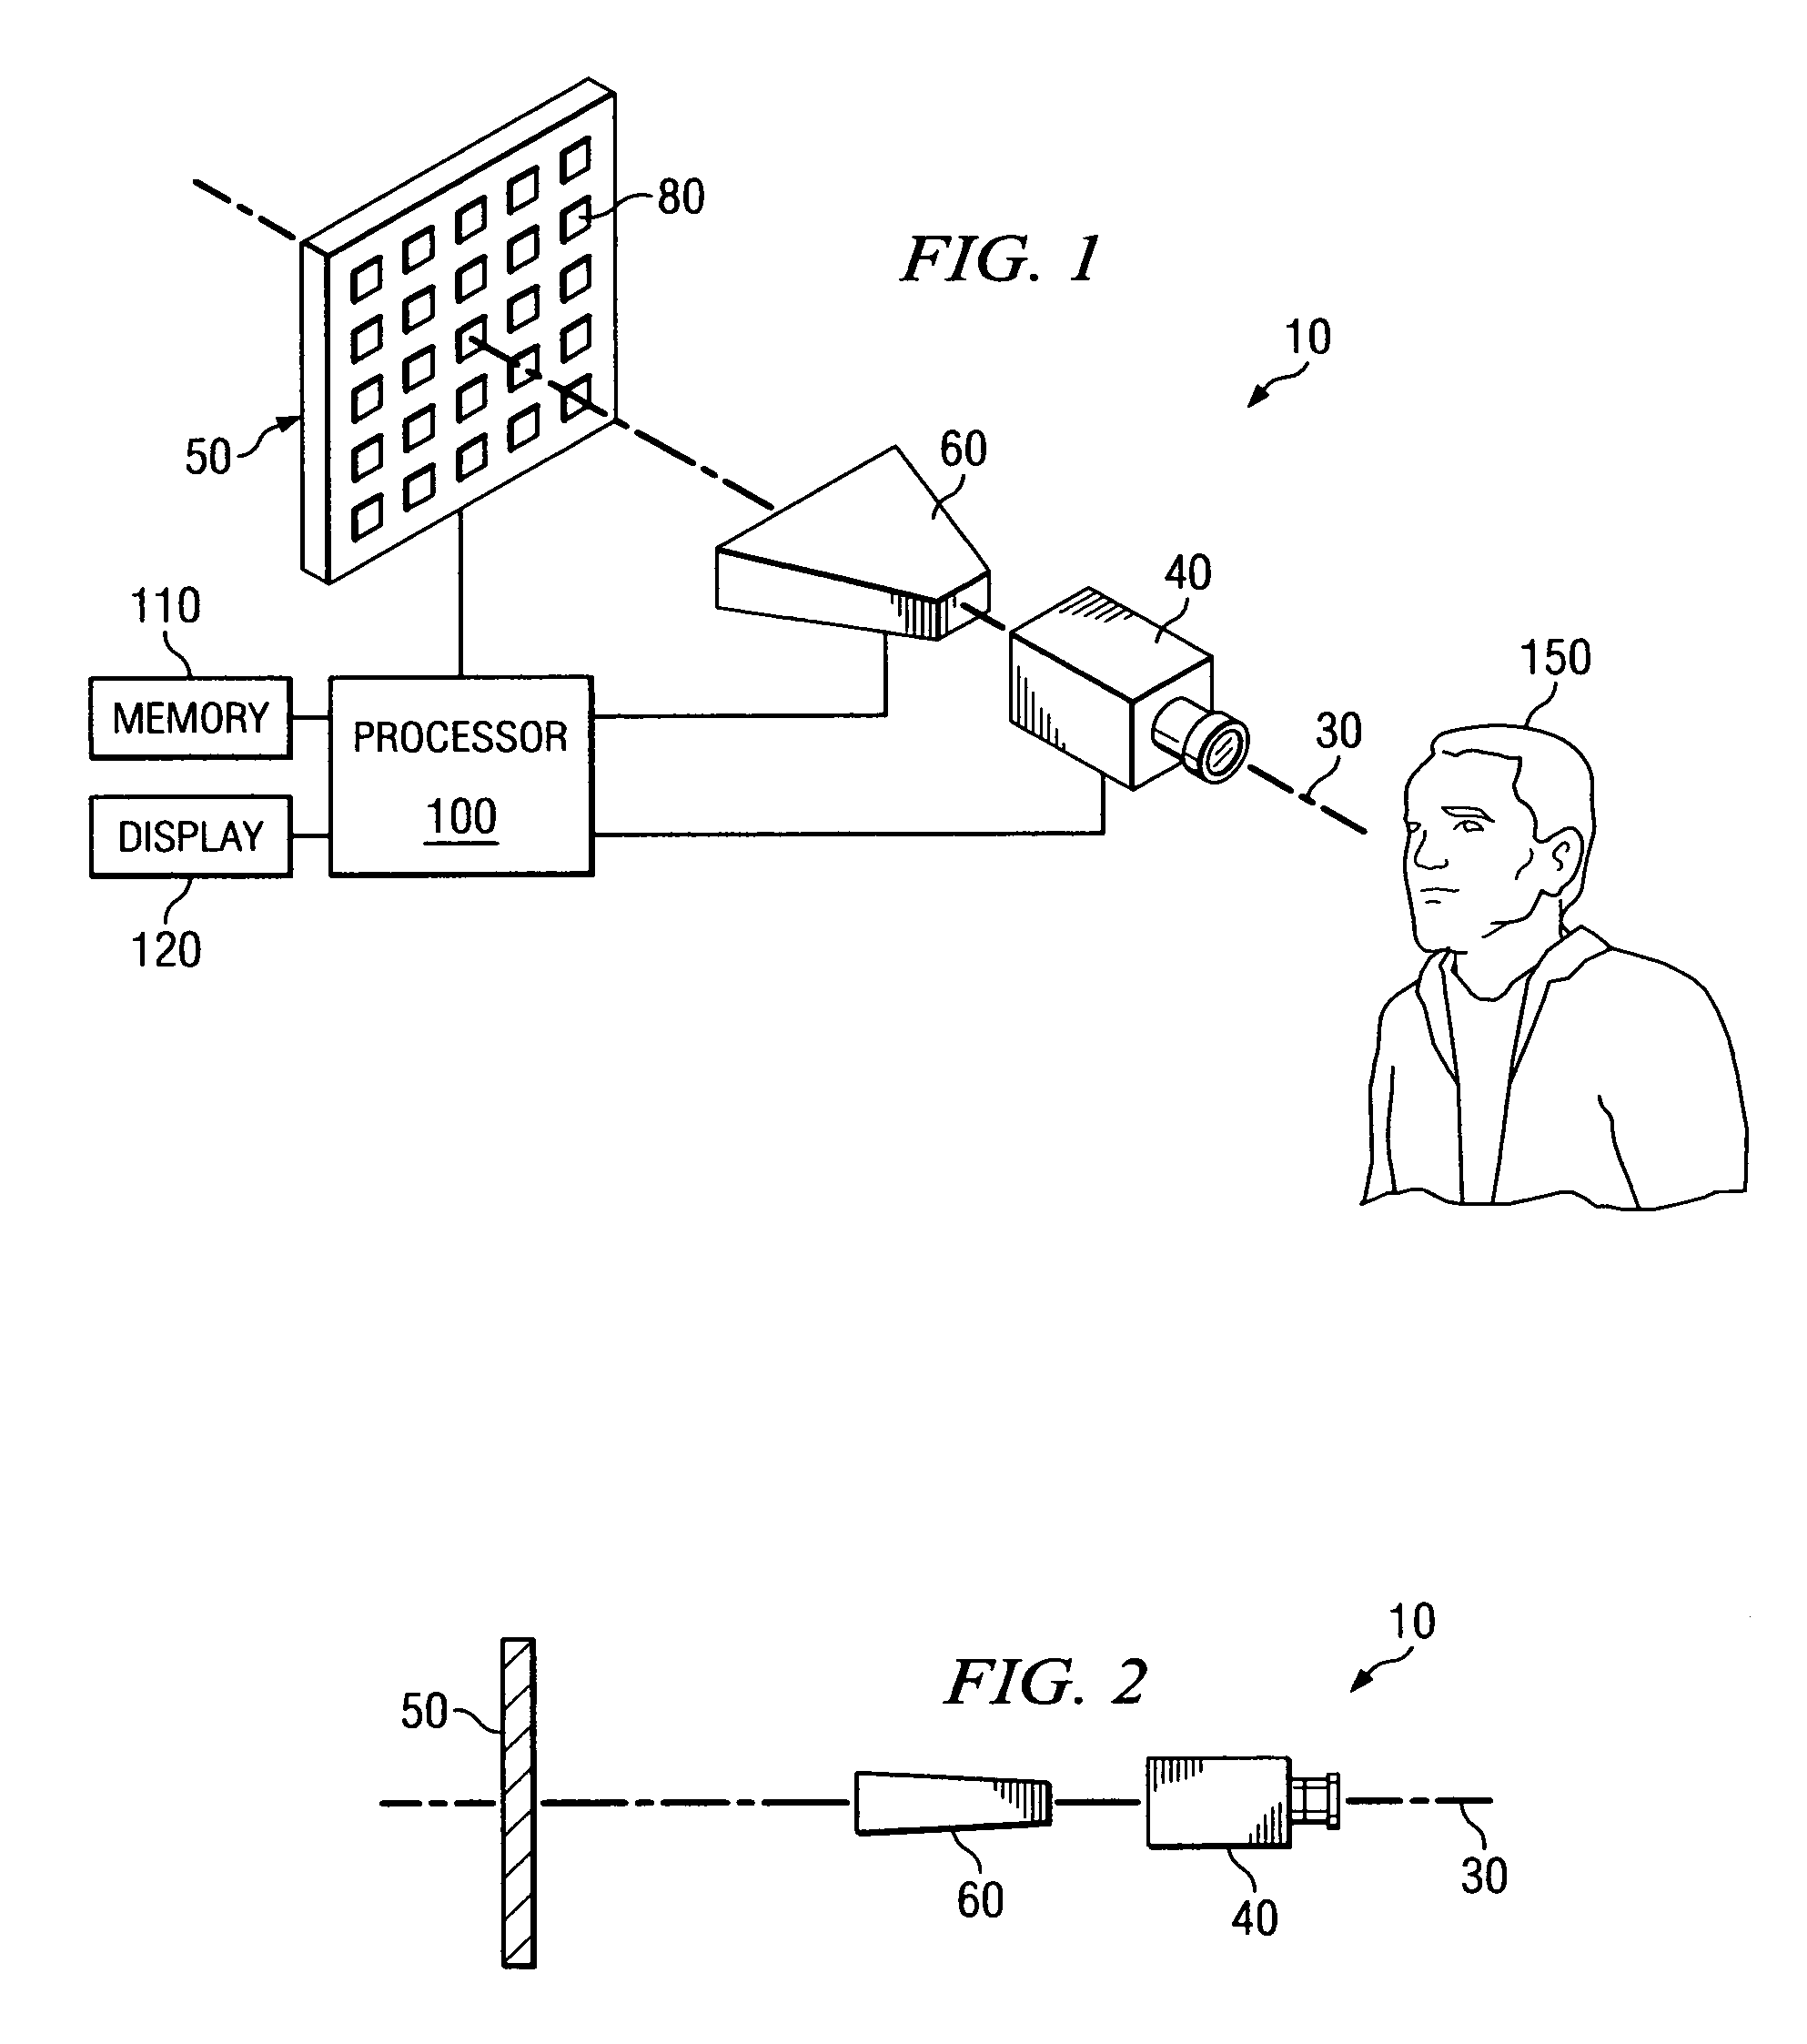 Coaxial bi-modal imaging system for combined microwave and optical imaging